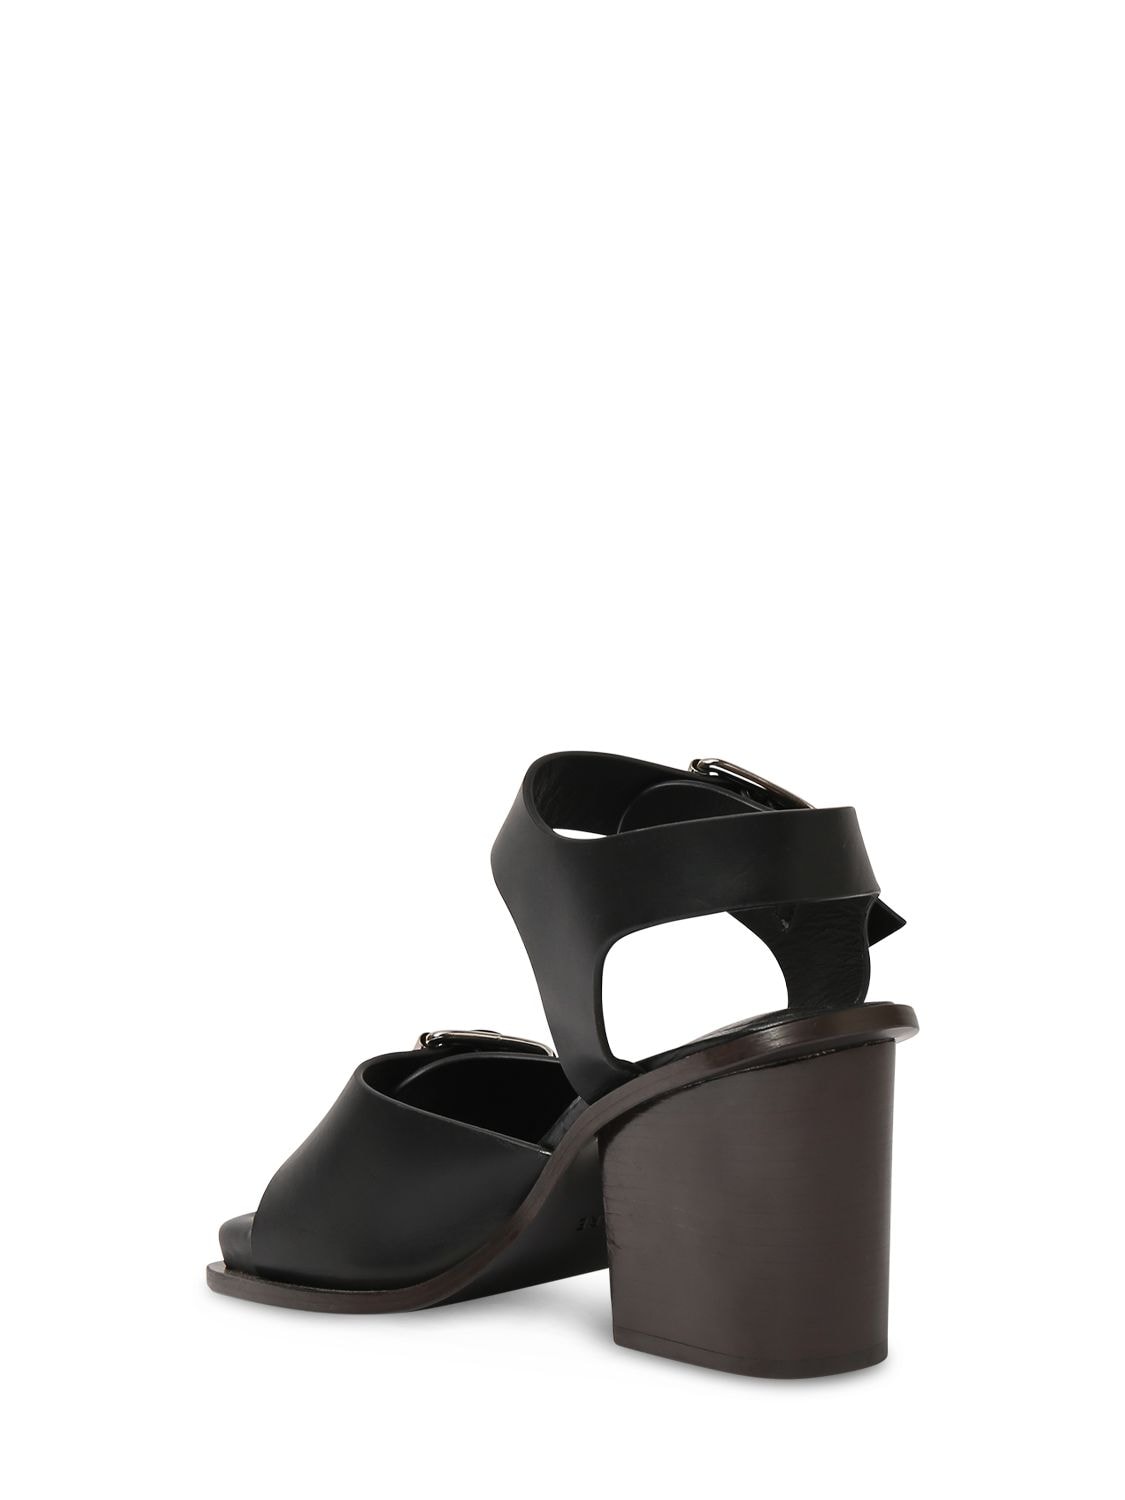 Shop Lemaire 80mm Square Heeled Sandals W/ Straps In Black